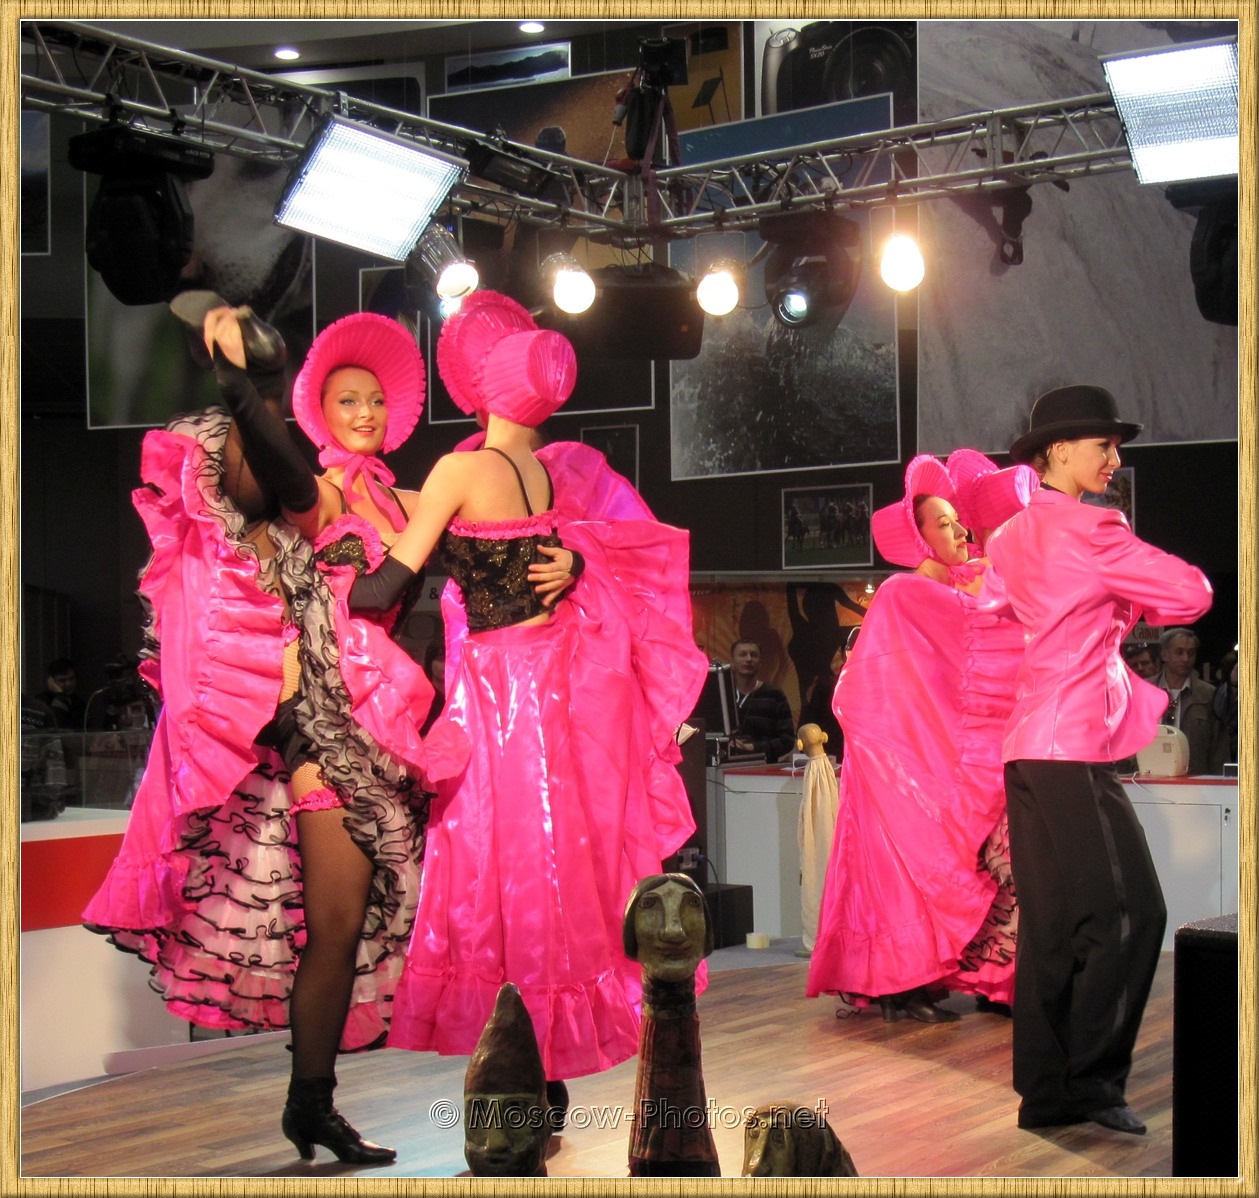 Girls Dancing In Pink Suits at Photoforum - 2010